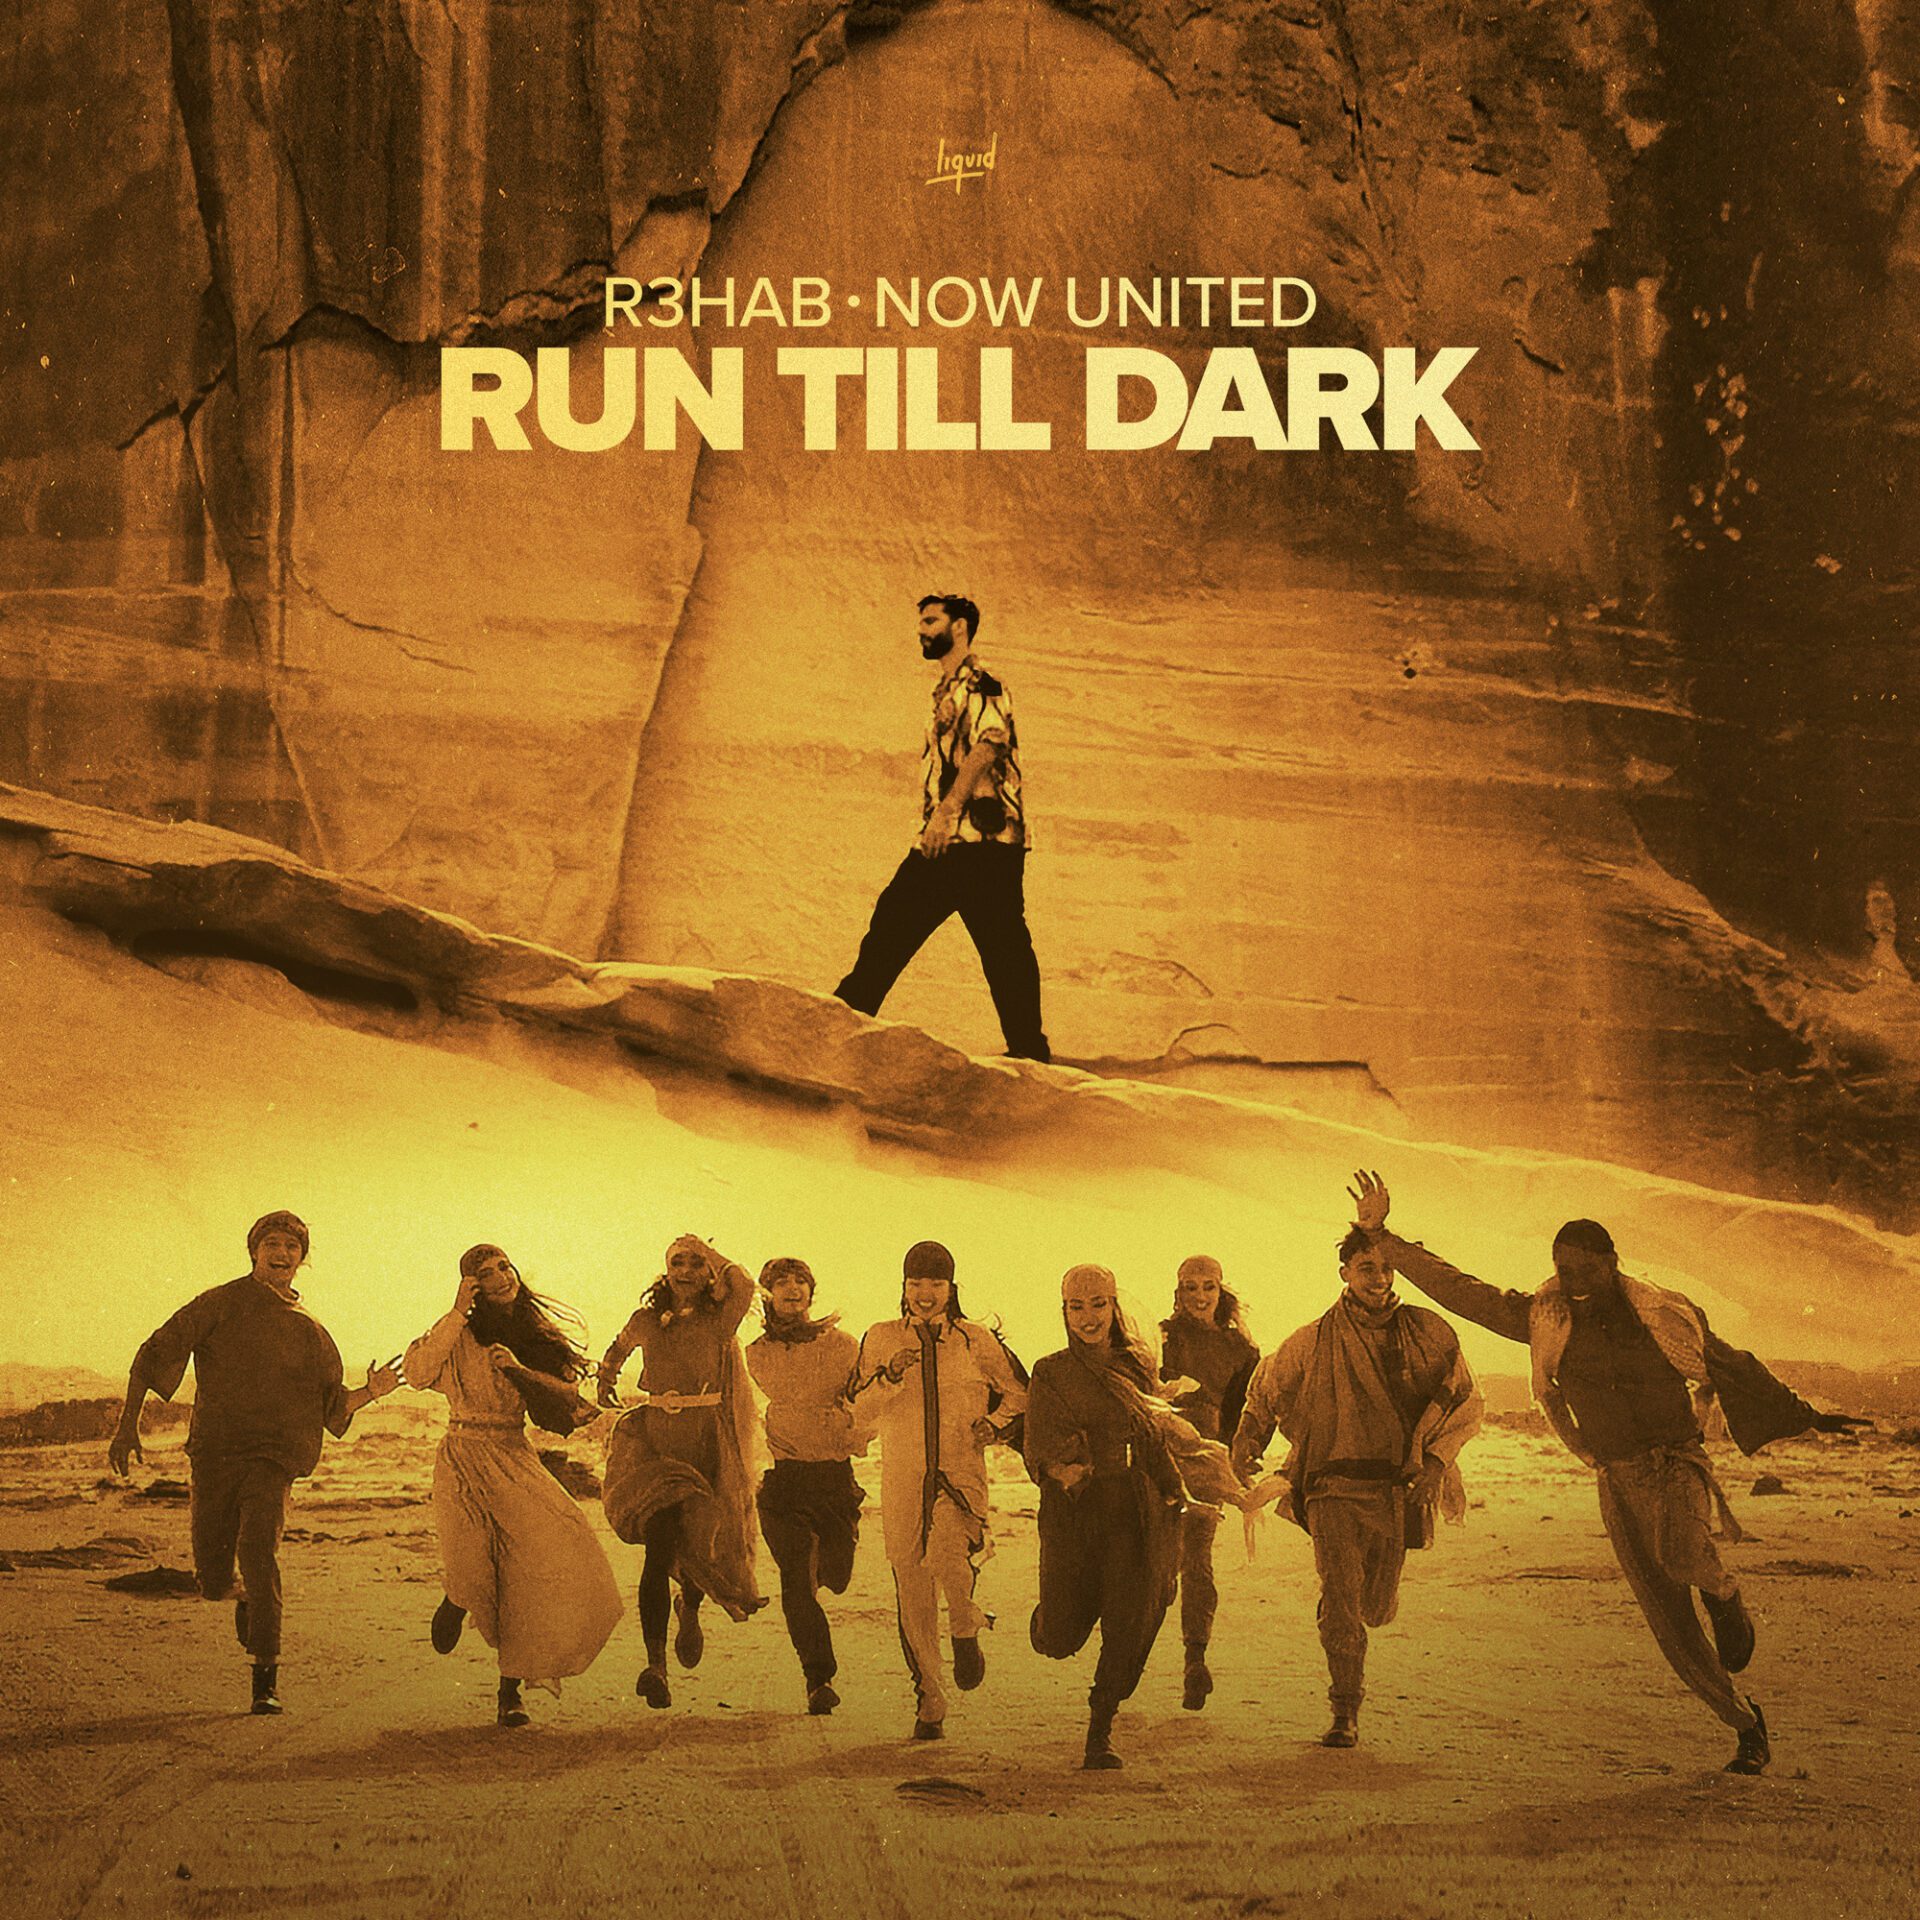 Cover Art for R3HAB's and Now United's "Run Till Dark"